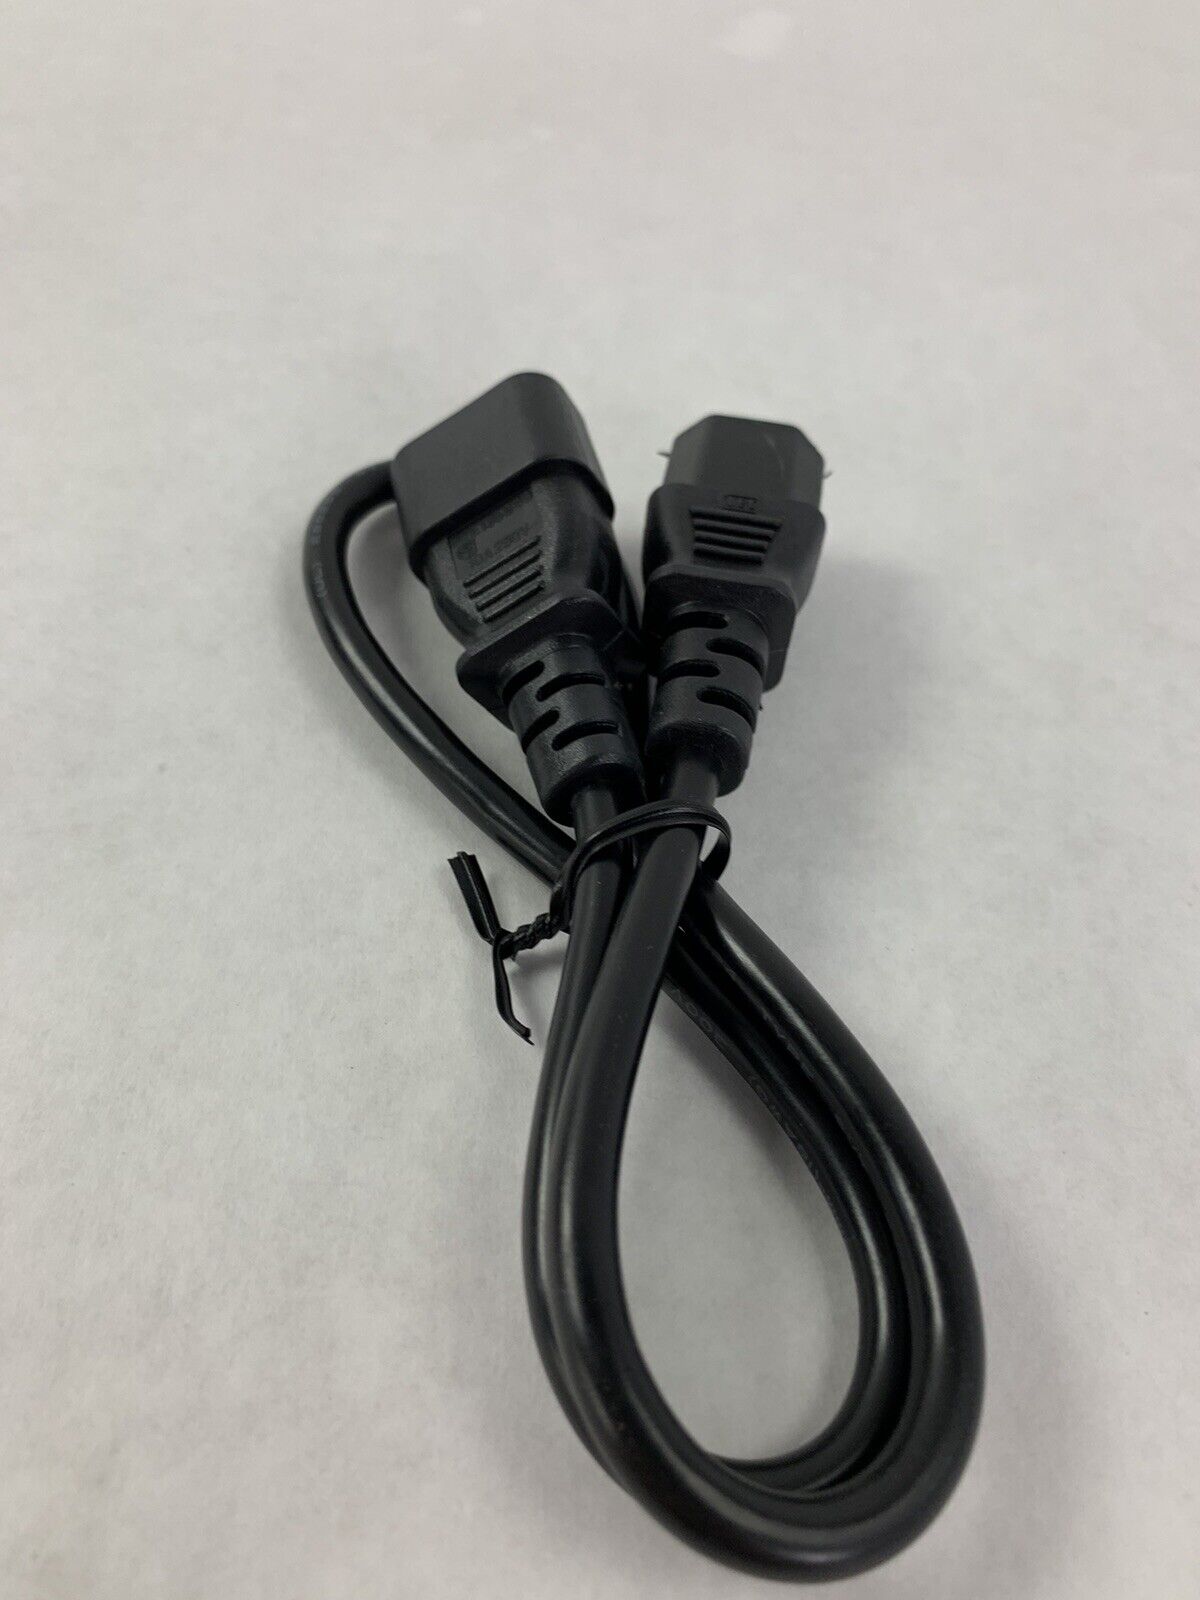 Lot of  3 C2G 300V Standard Computer Power Cord Extension C14 to C13 Server